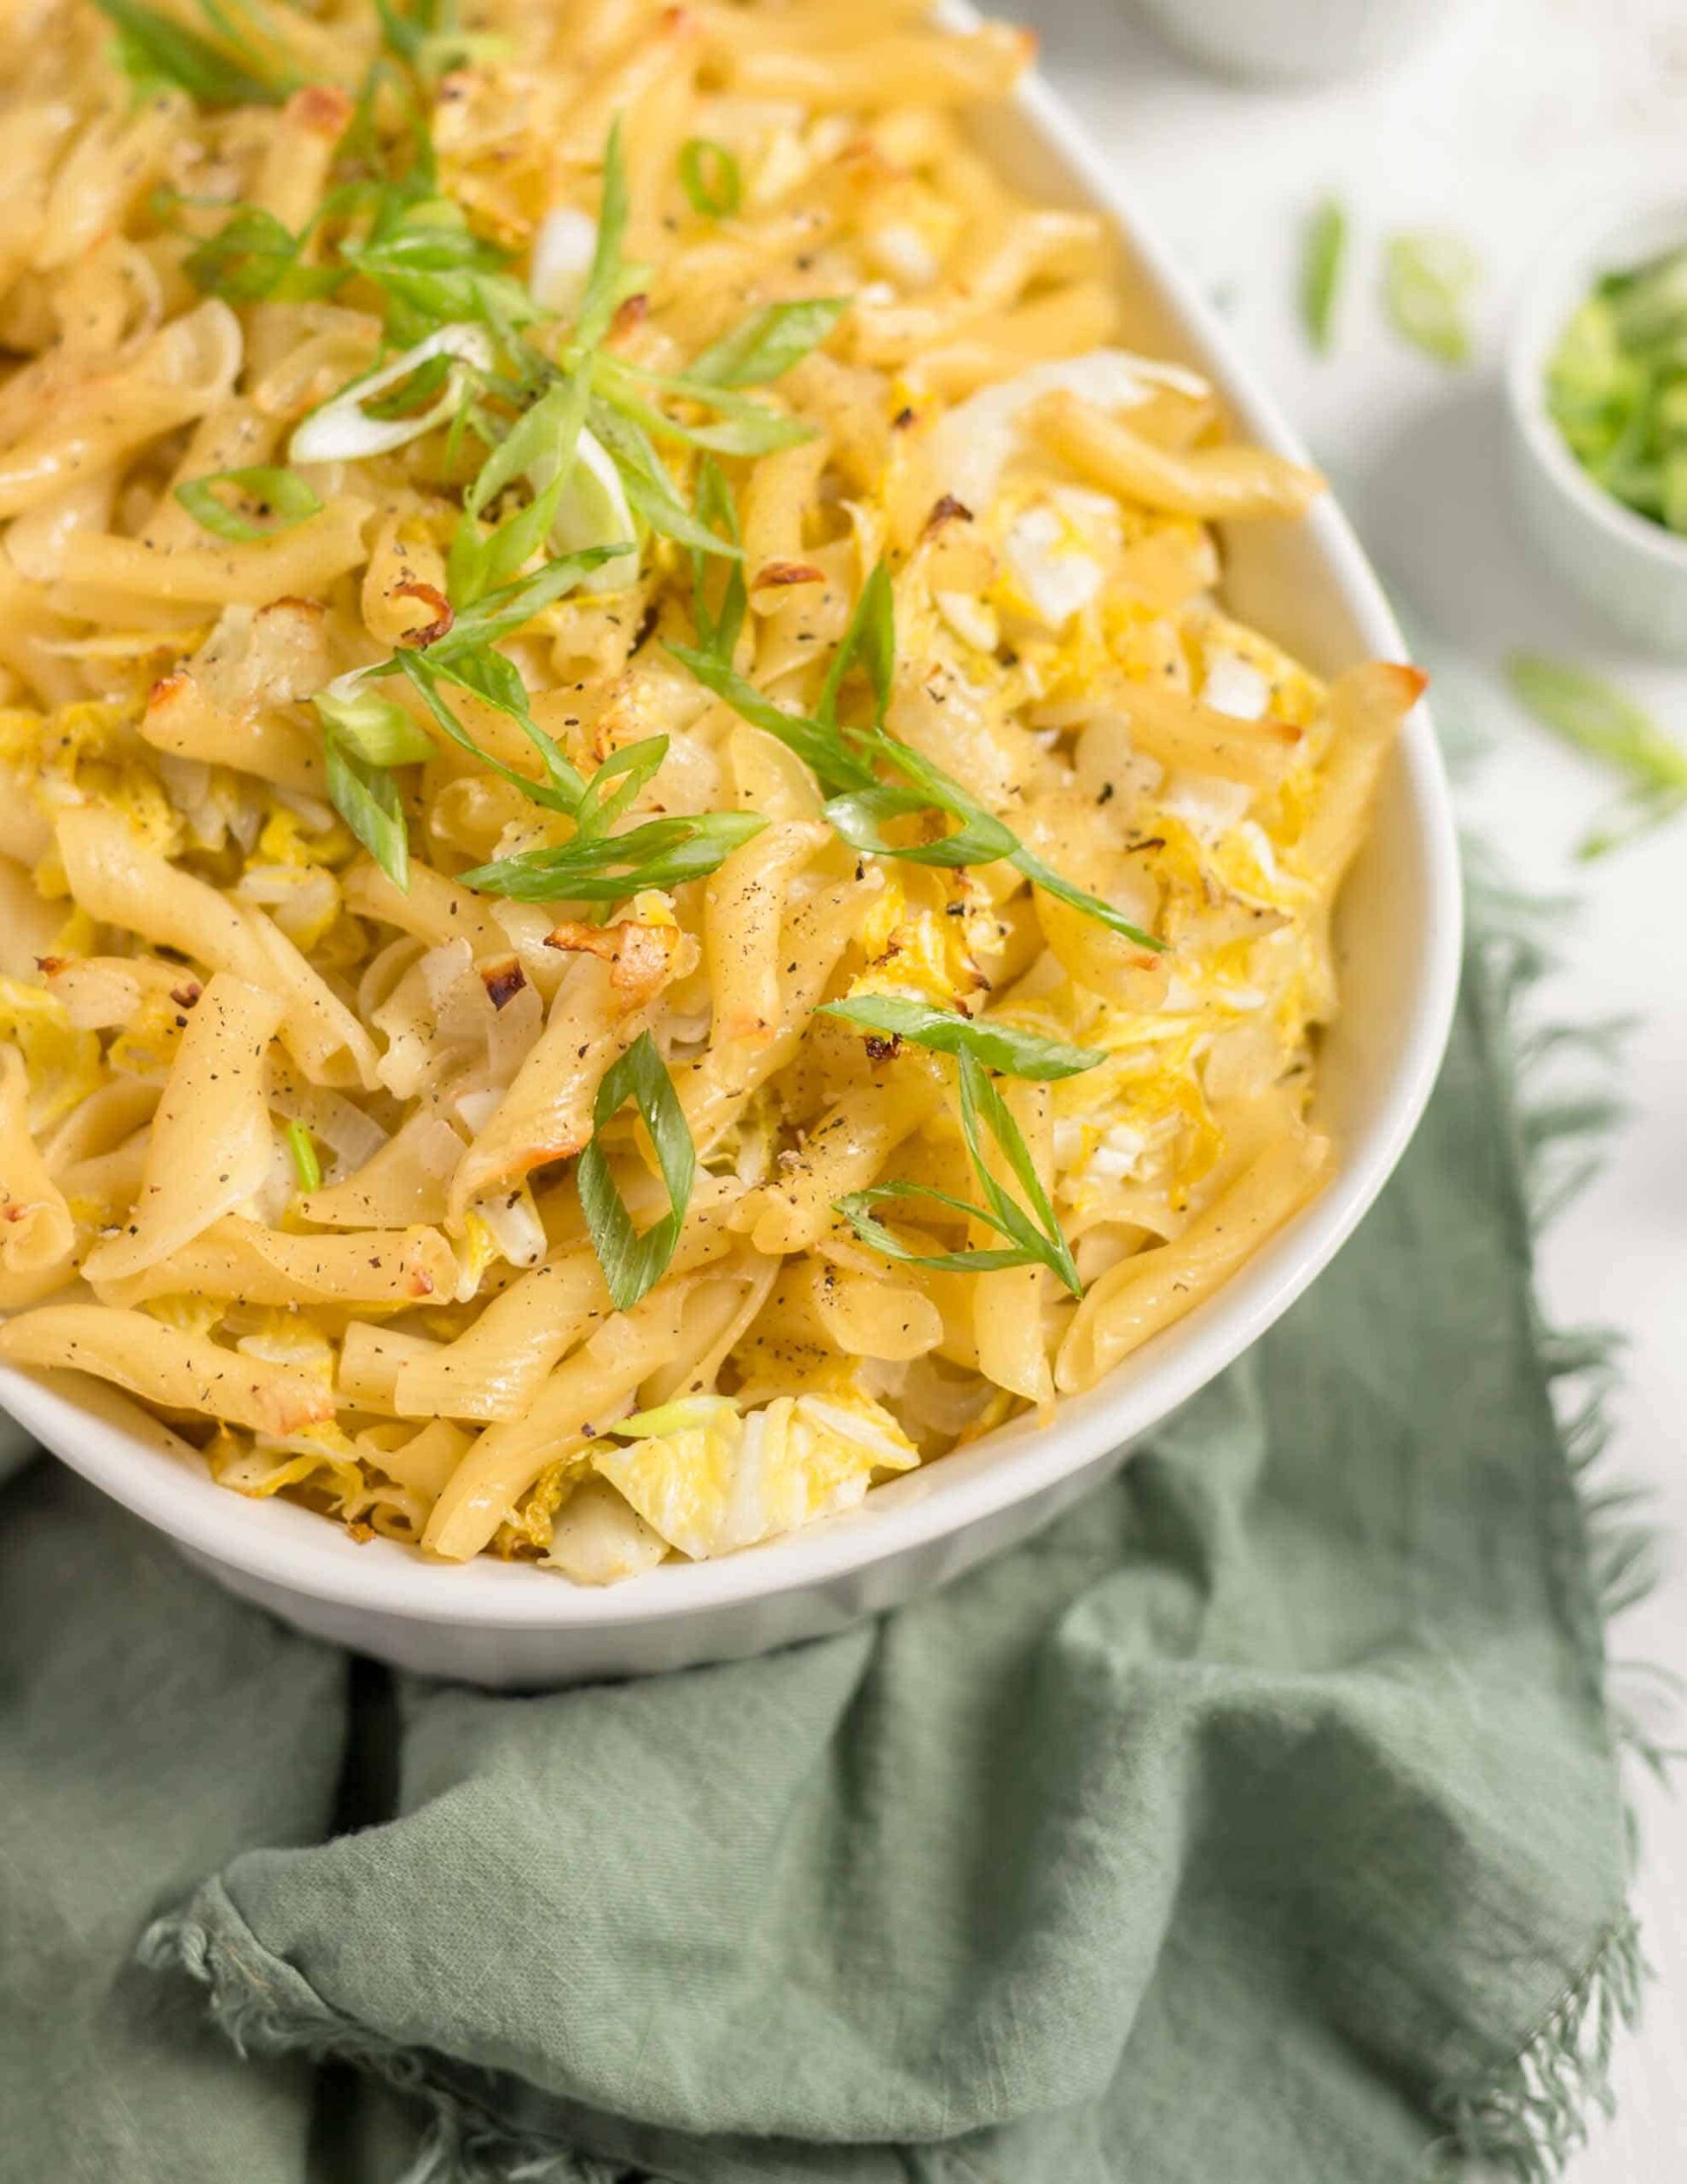 Vegan Cabbage and Noodles Casserole Dish for Dinner